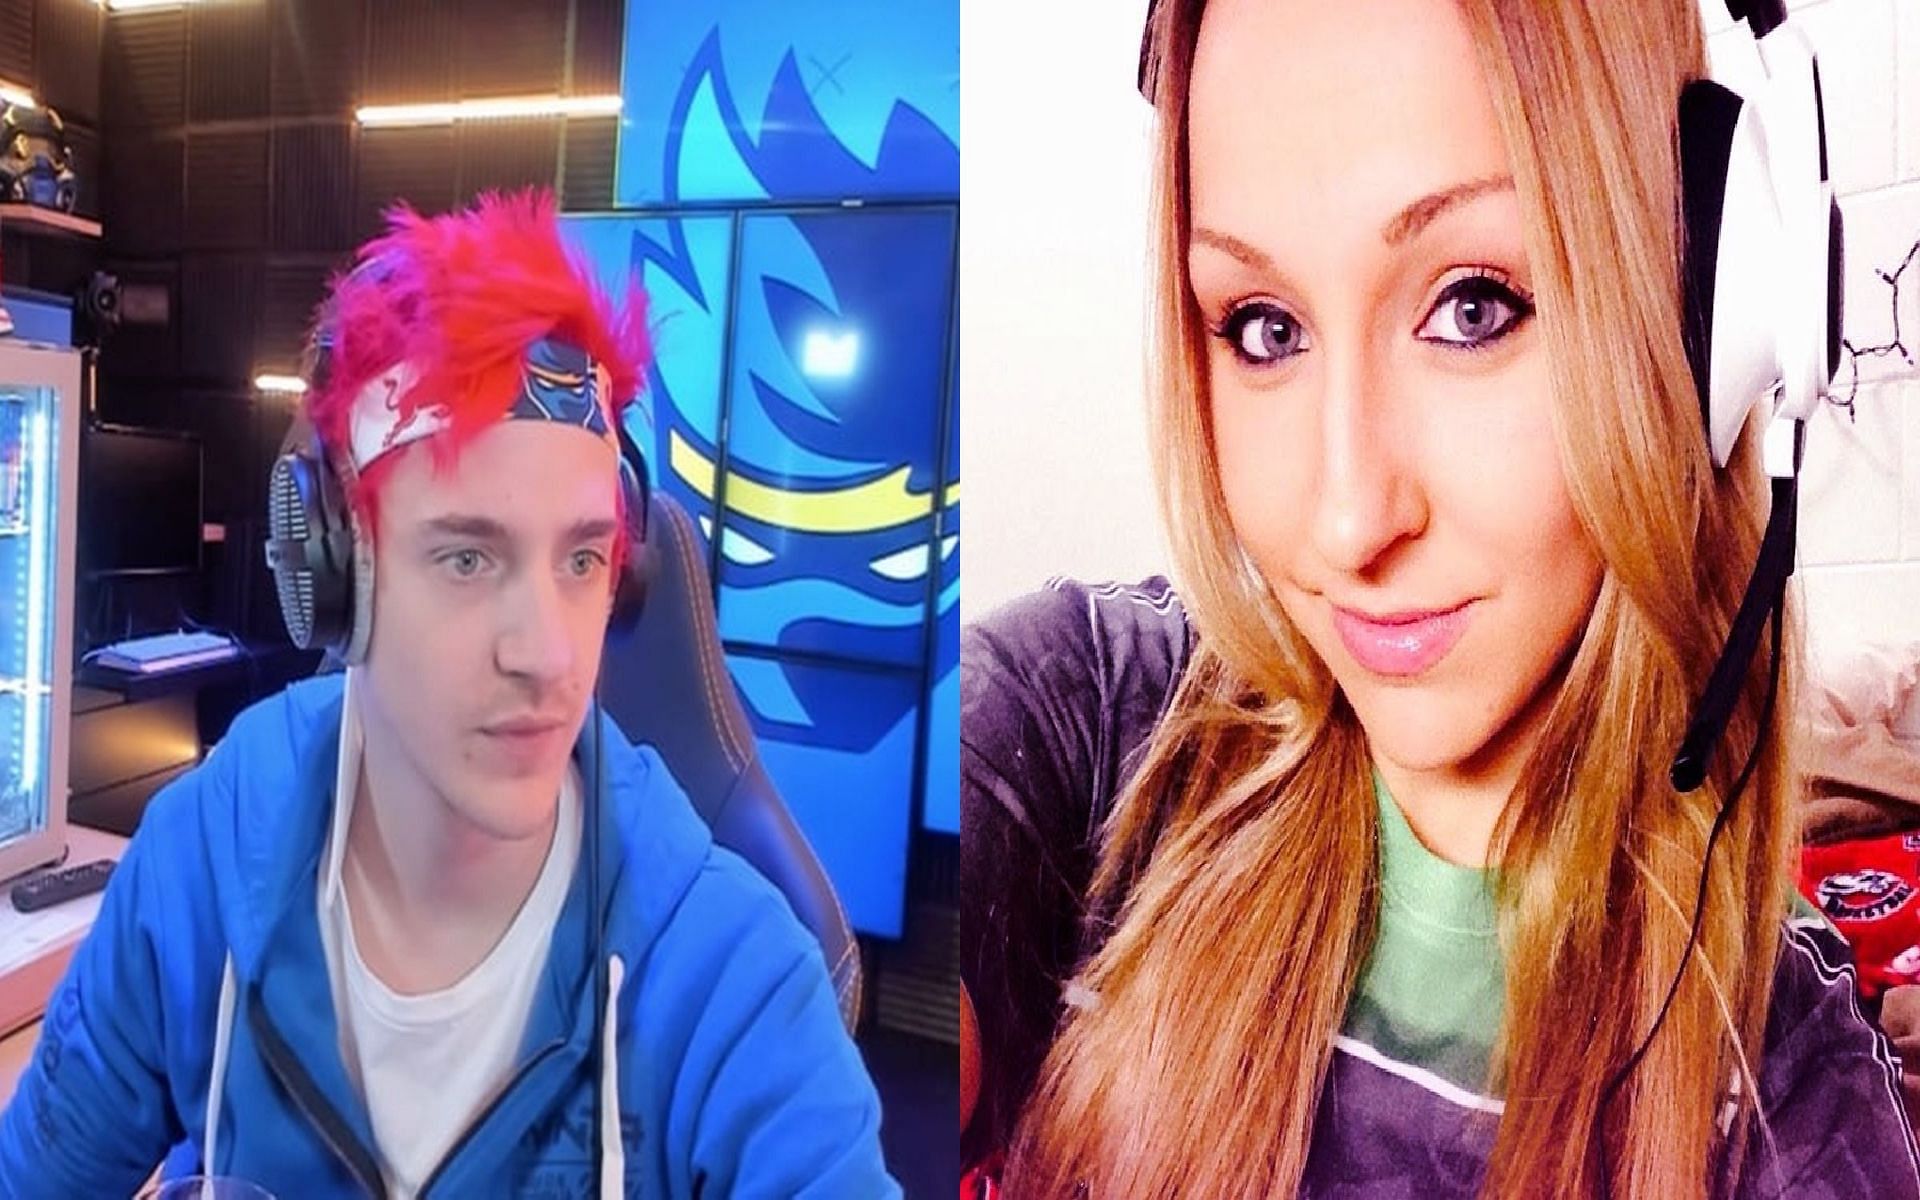 Jessica Blevins is also married to Ninja (Image via Ninja/Twitch and JessicaBlevins/Twitter)